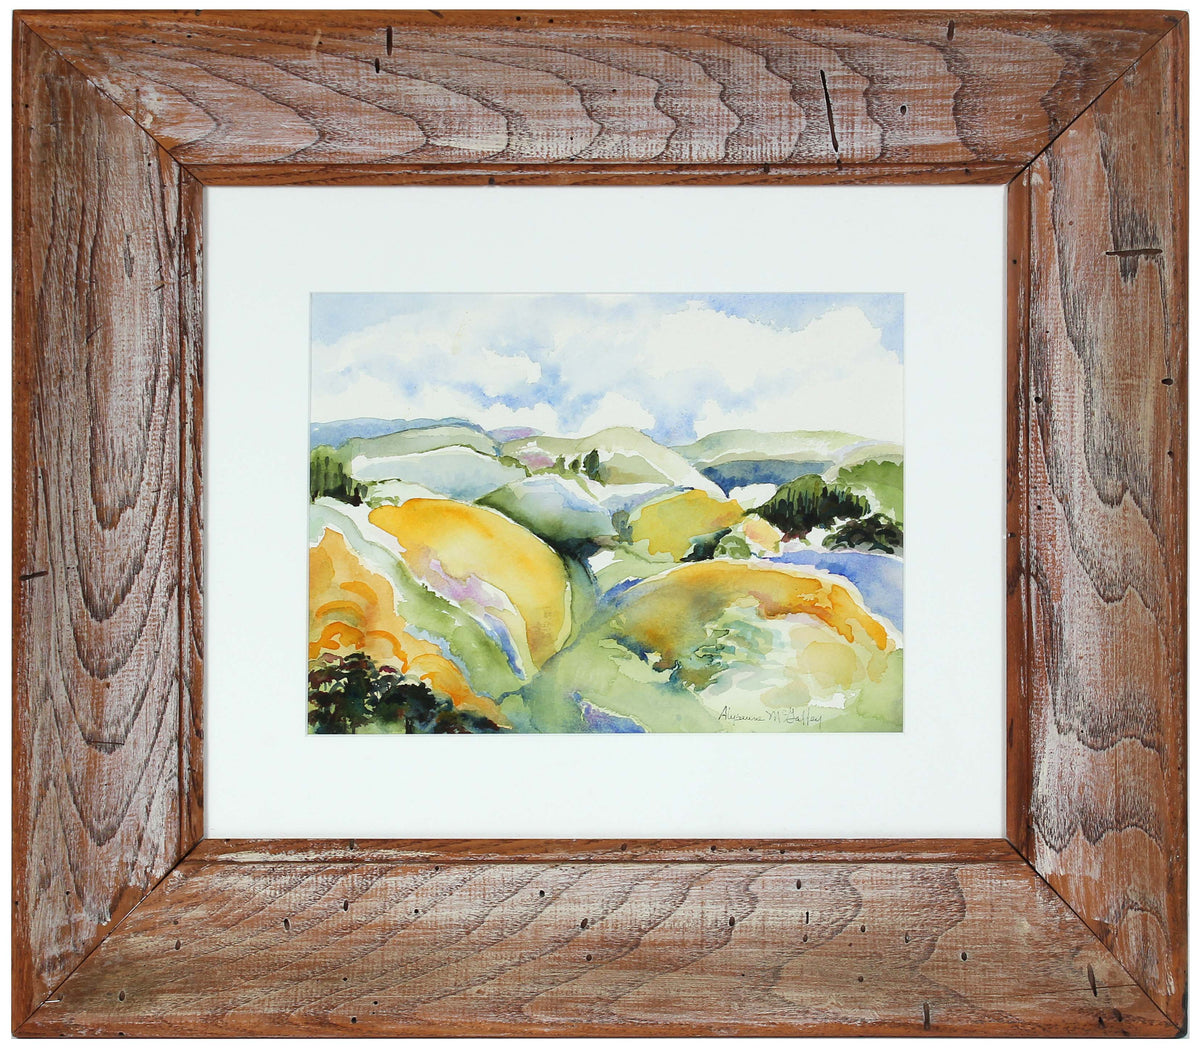 &lt;i&gt;Pacifica Hills, CA&lt;/i&gt;, Watercolor&lt;br&gt;Late 20th - Early 21st Century&lt;br&gt;&lt;br&gt;#43880